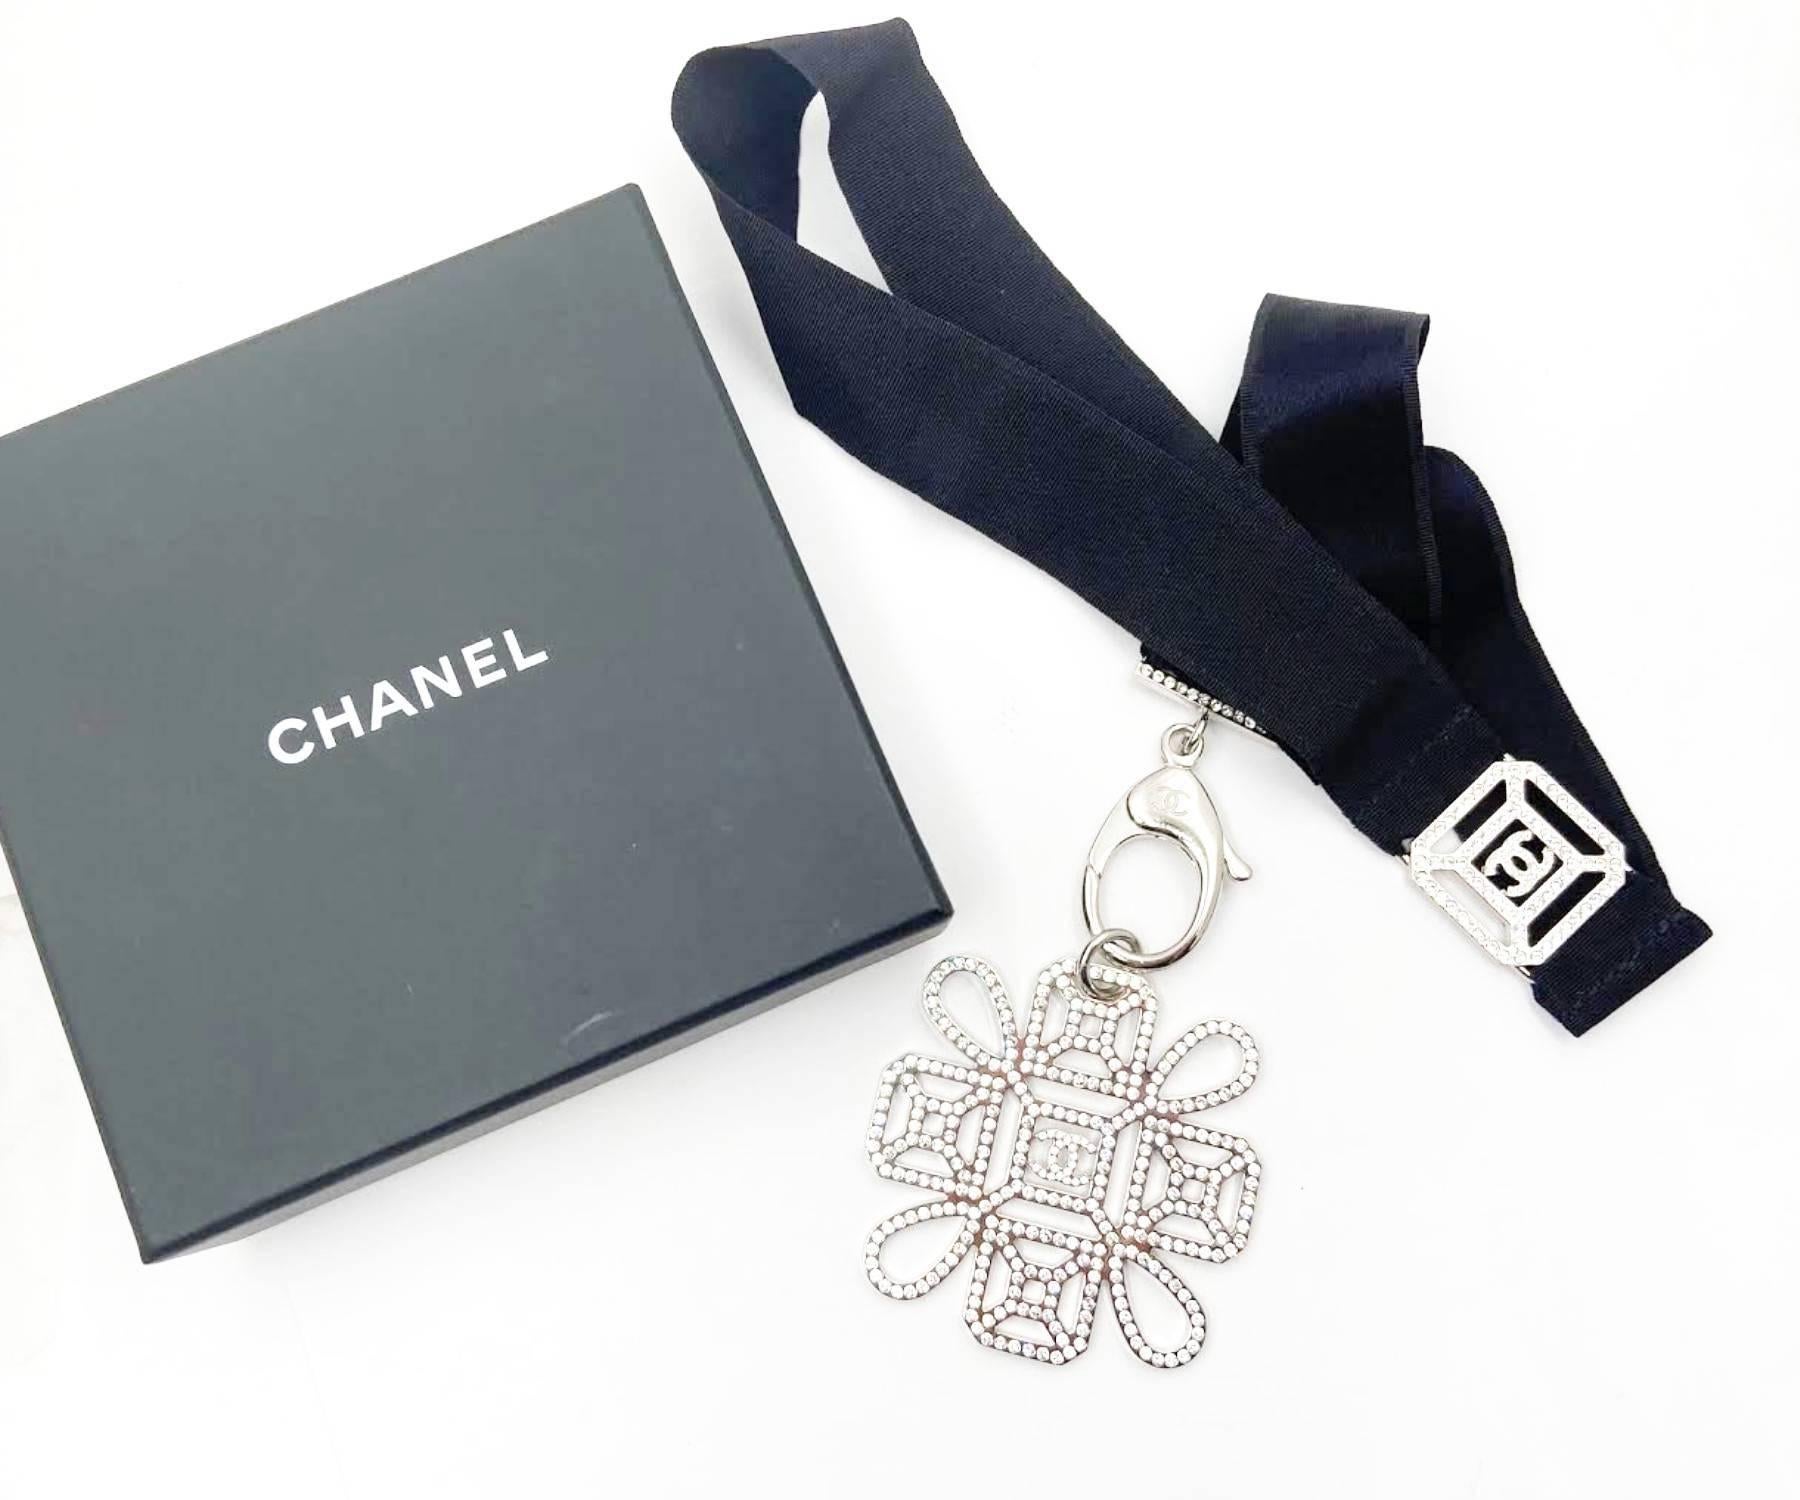 Chanel Silver CC Detachable Crystal Pendant Ribbon Key Chain Necklace

*Marked 17
*Made in Italy
*Comes with the original box and pouch

-It is approximately 26.5